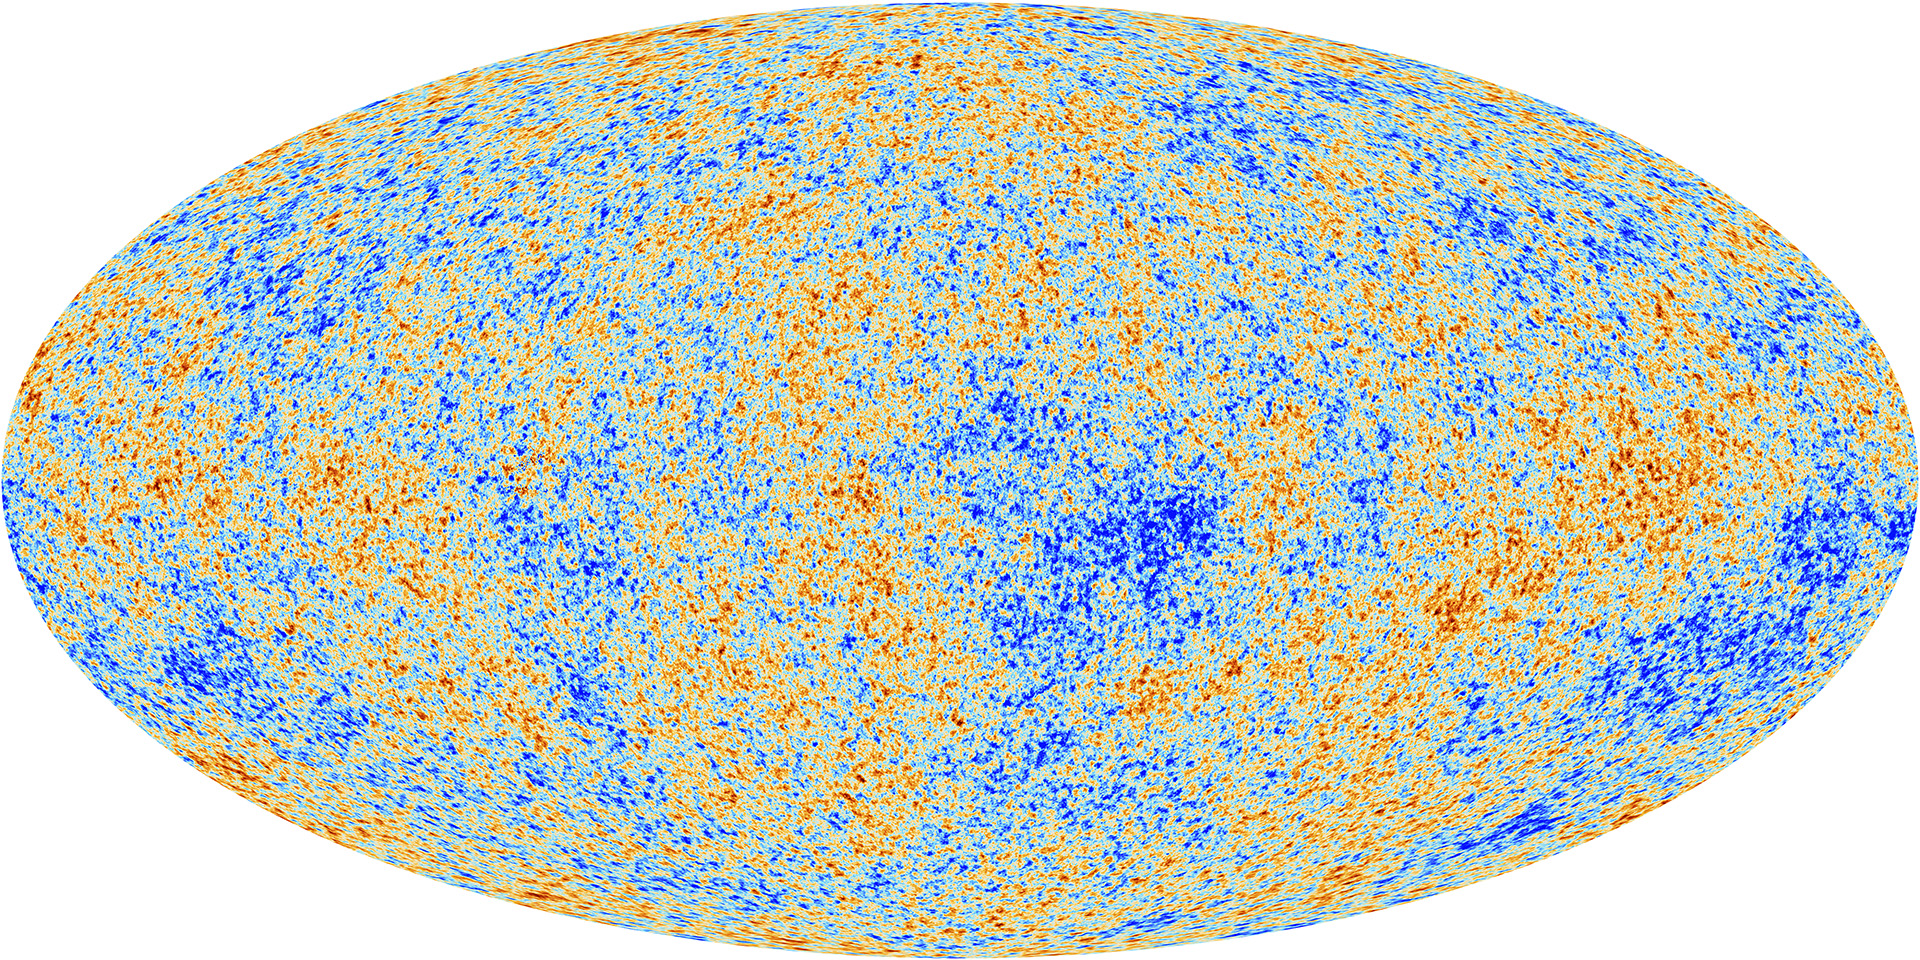 Looking for Extra Dimensions in the Cosmic Microwave Background